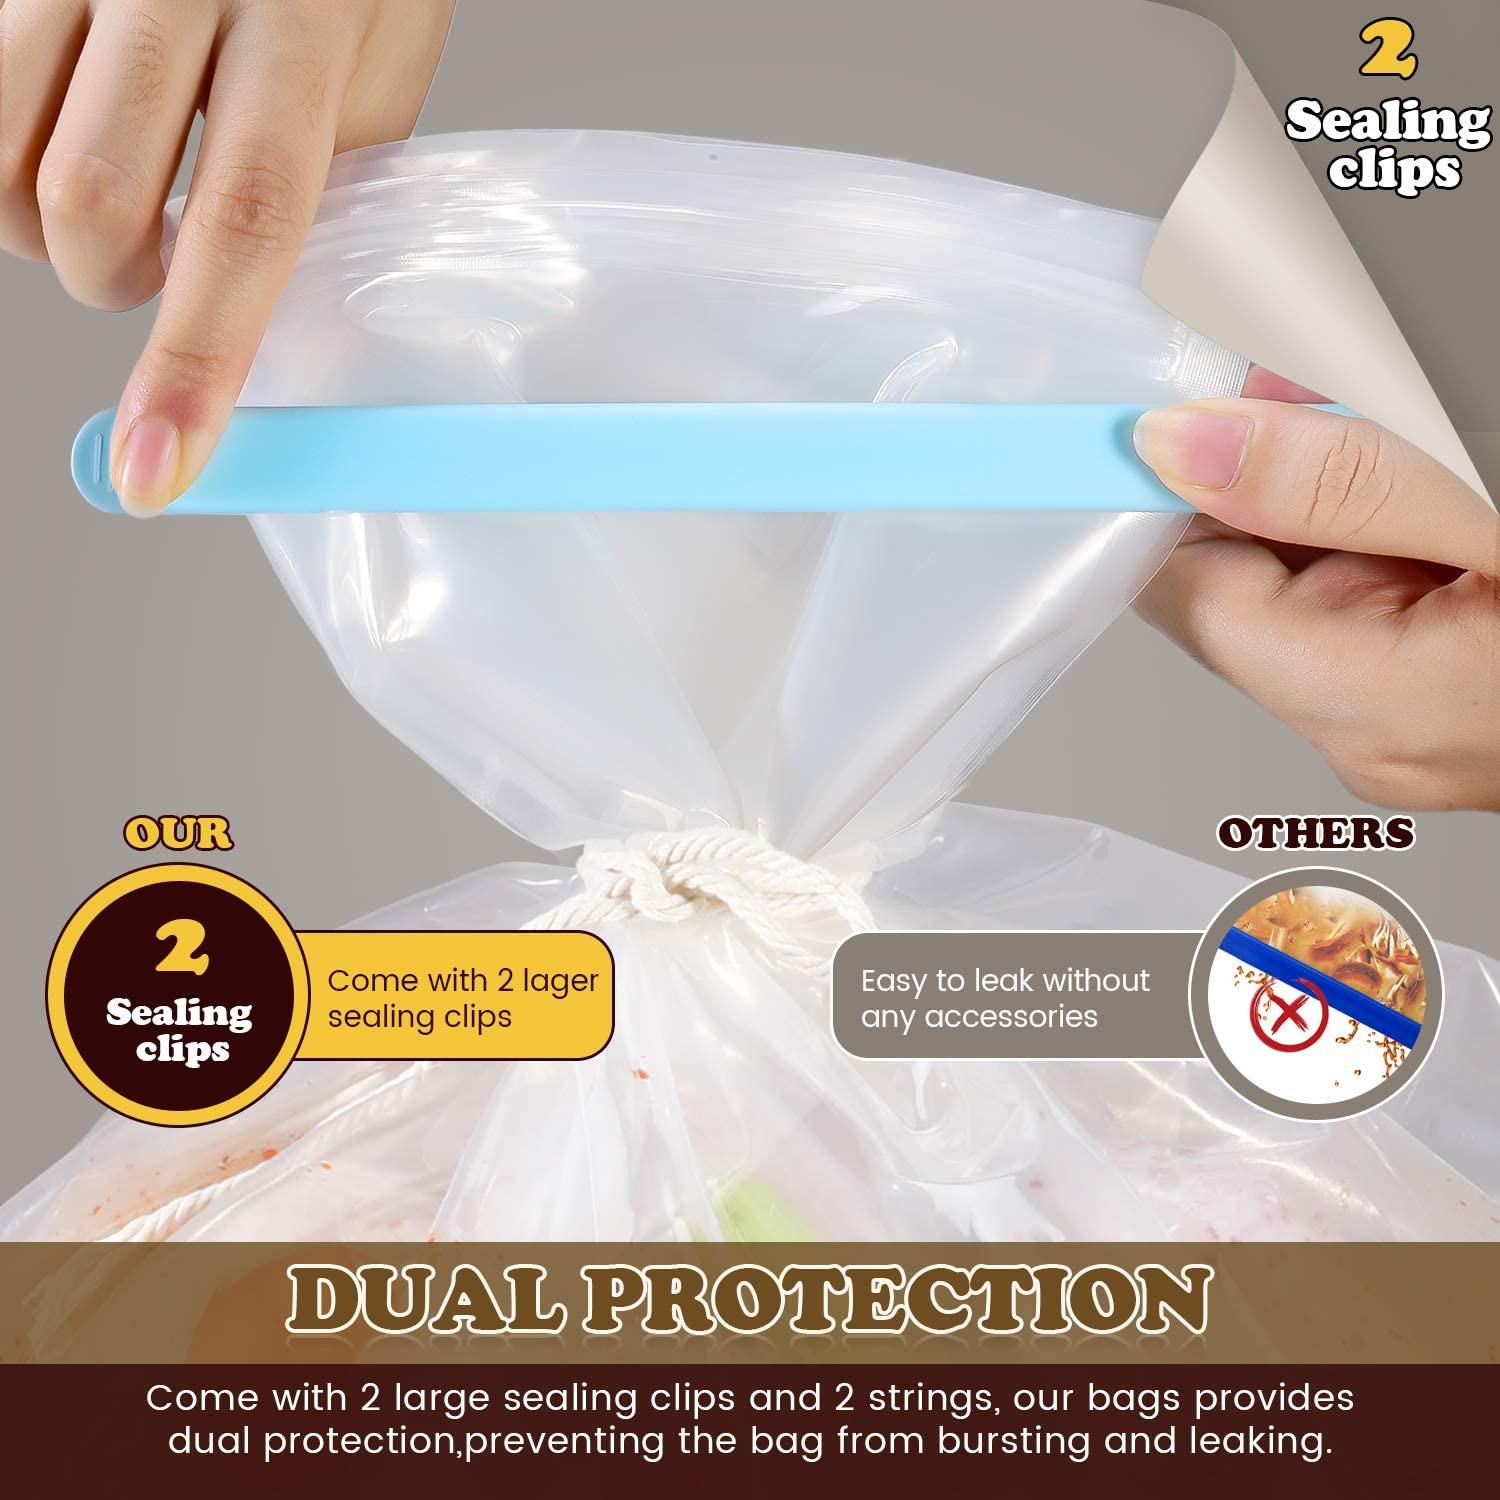 Turkey Brining Bags Set of 2 - Extra Large Holds up to 38lb - 25.5 x 21.5  inches - Heavy Duty with Gusseted Bottom - Double Track Zippers to Avoid